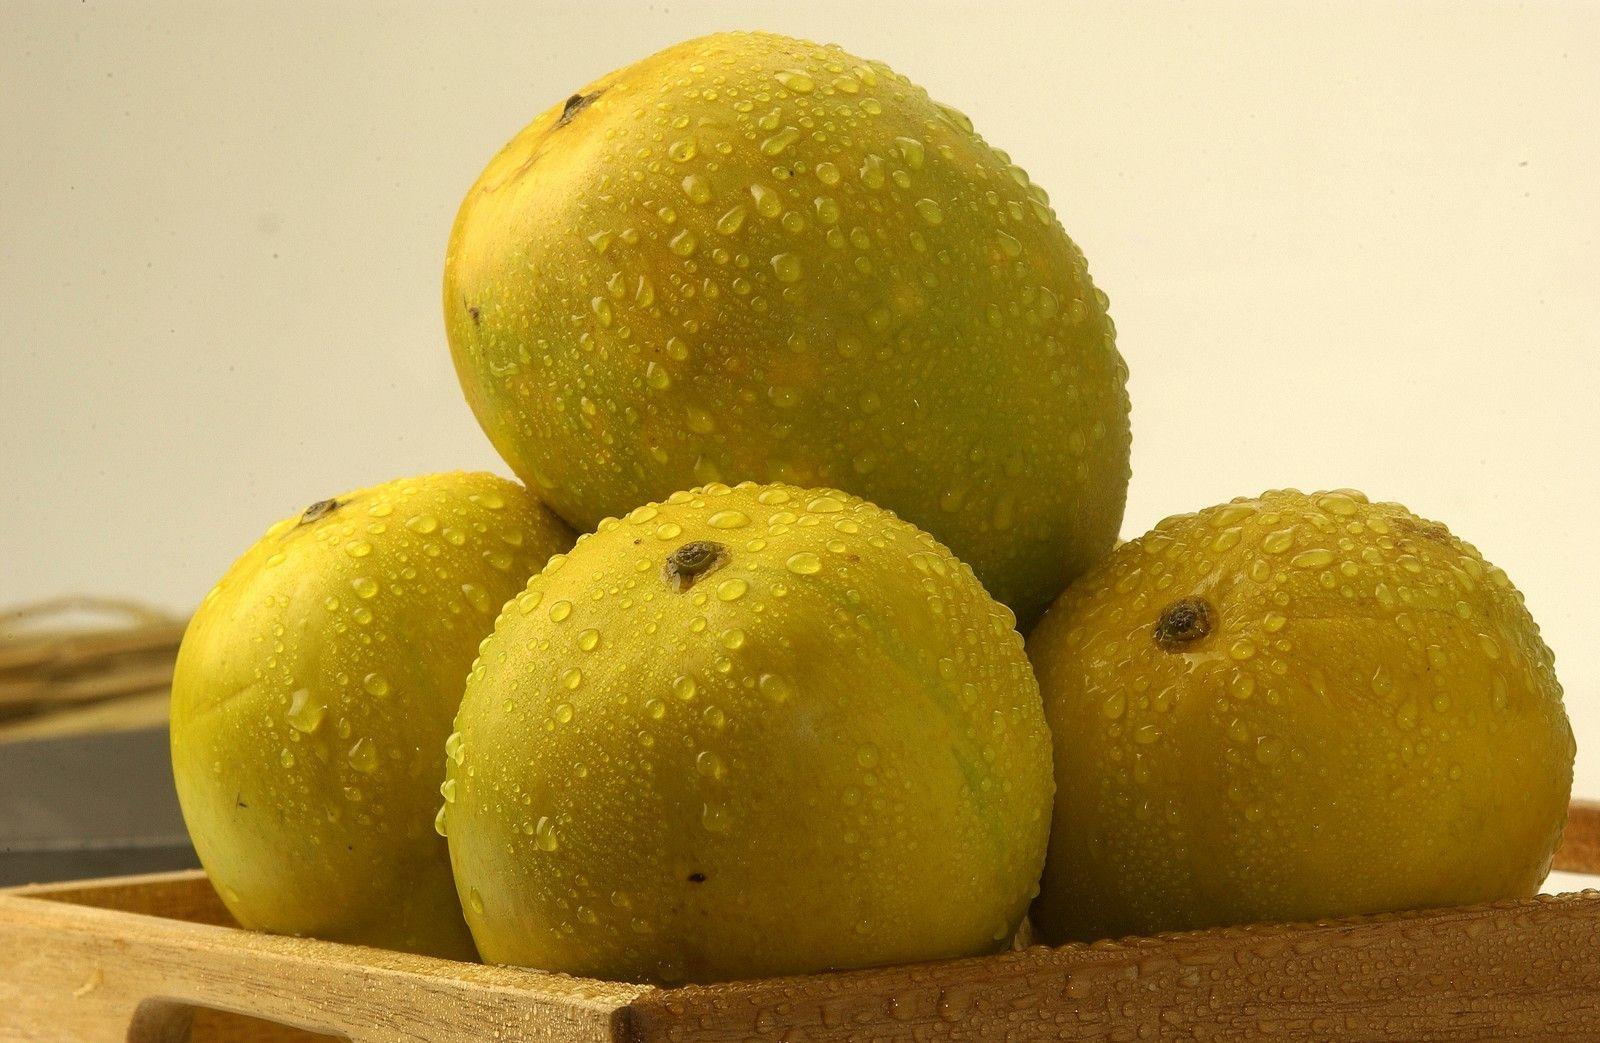 Mango is popularly known as one of the most nourishing, delicious